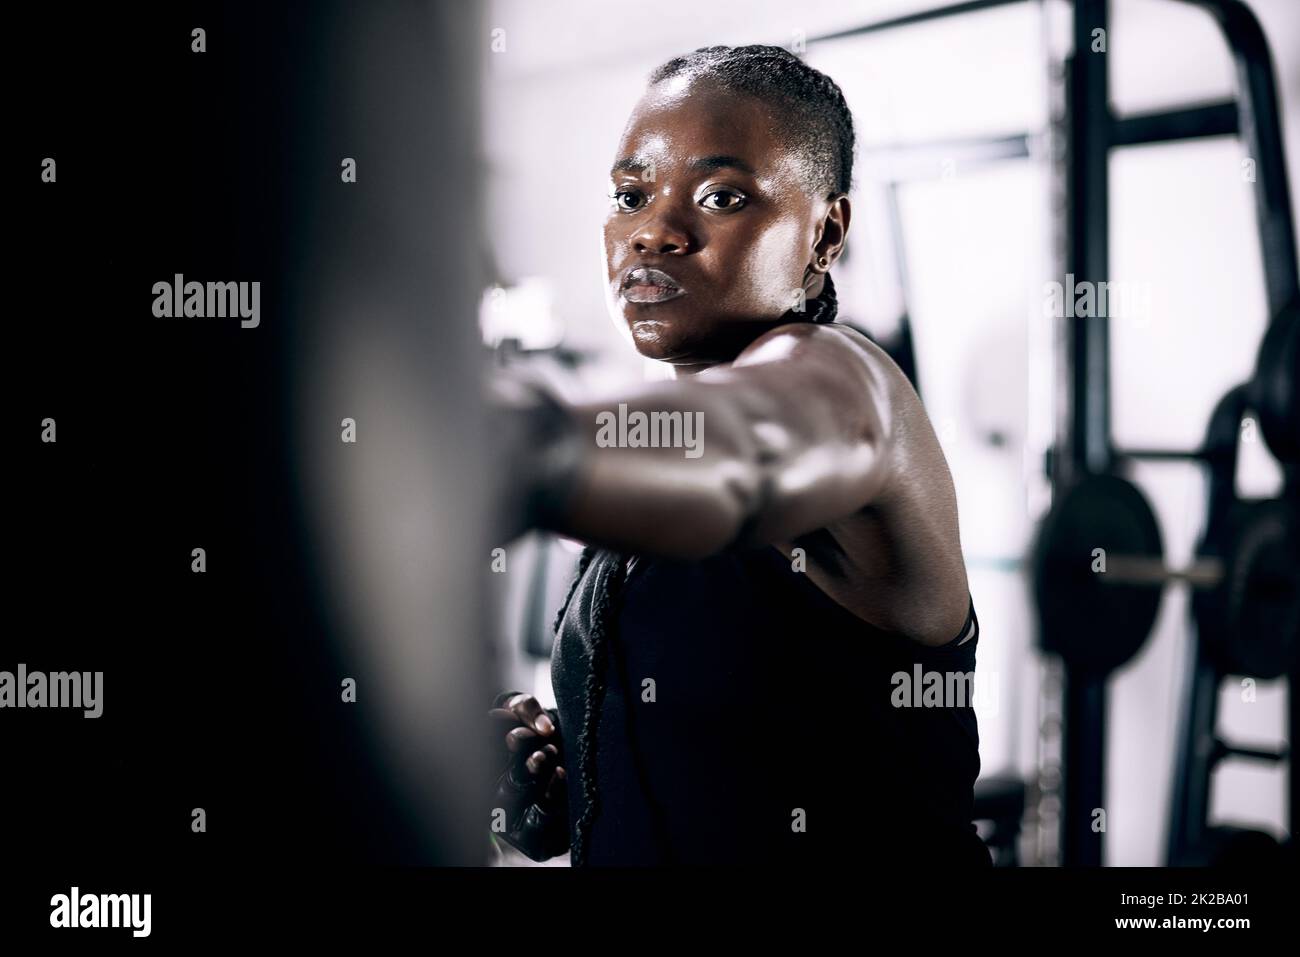 Striking with accuracy. Cropped shot of an attractive young female athlete working out on a boxing bag in the gym. Stock Photo